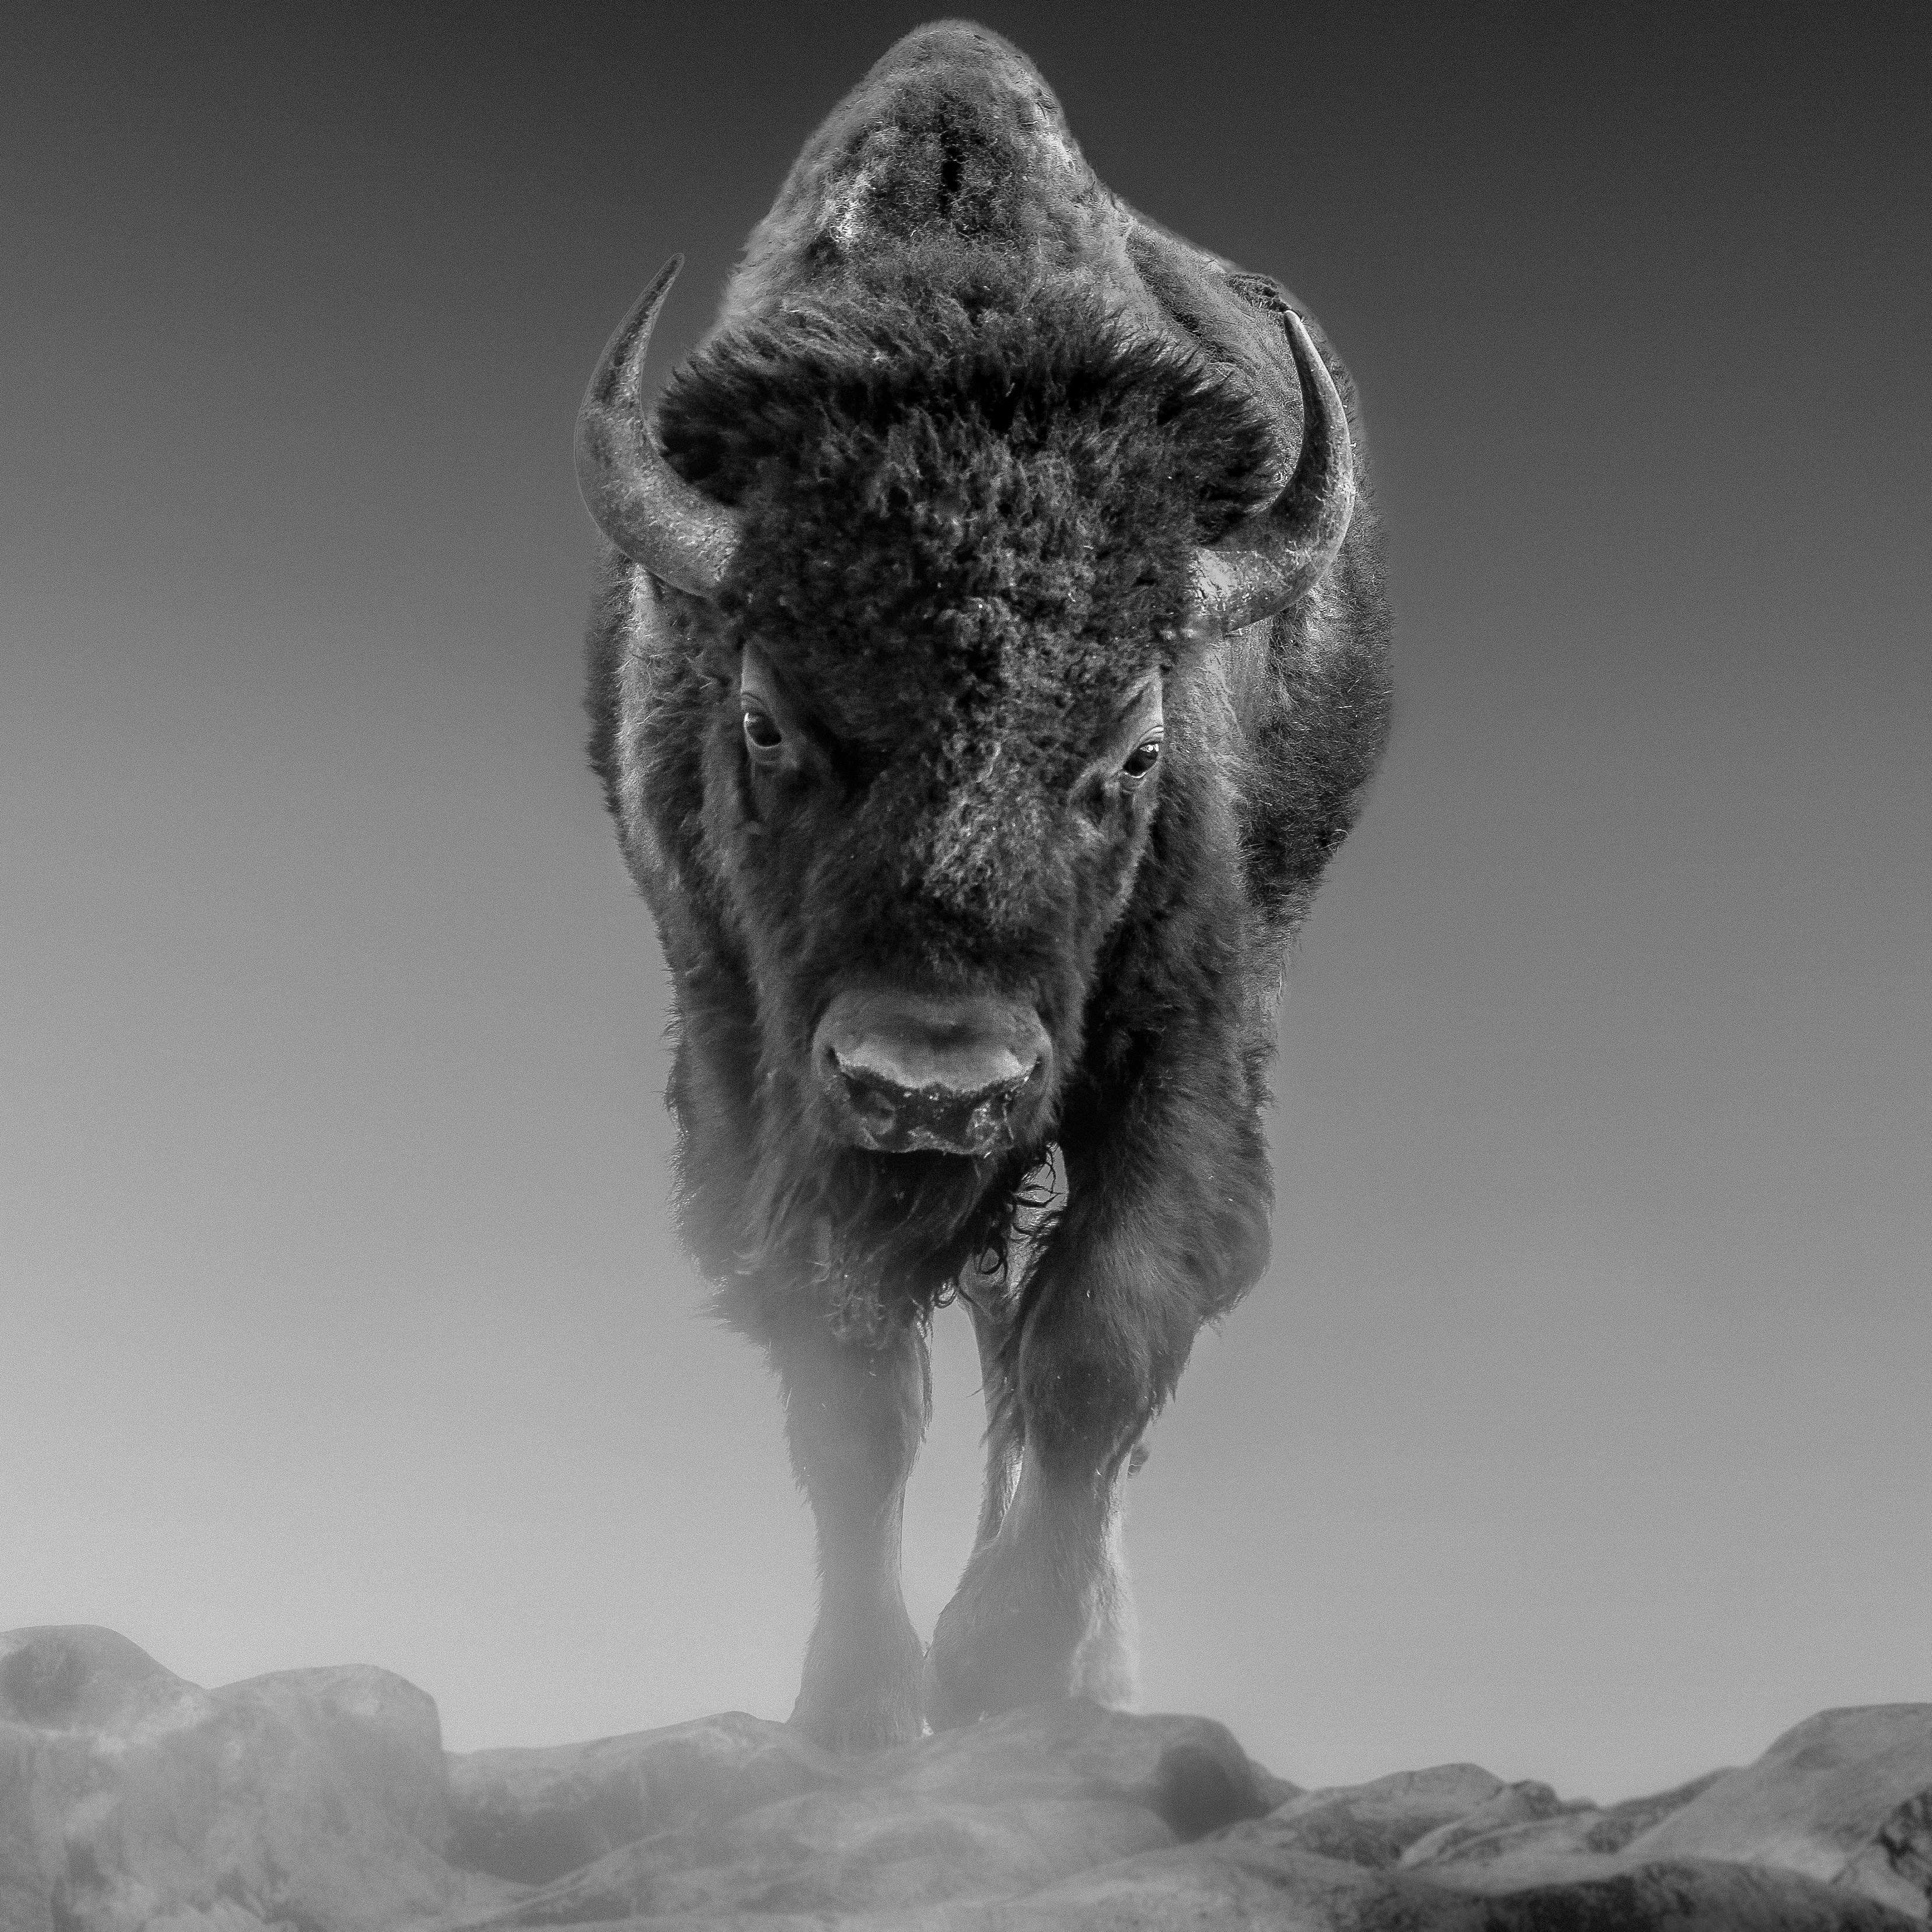 Shane Russeck Black and White Photograph - "American Buffalo" 50x60  Black & White Photography Bison Buffalo Photograph Art